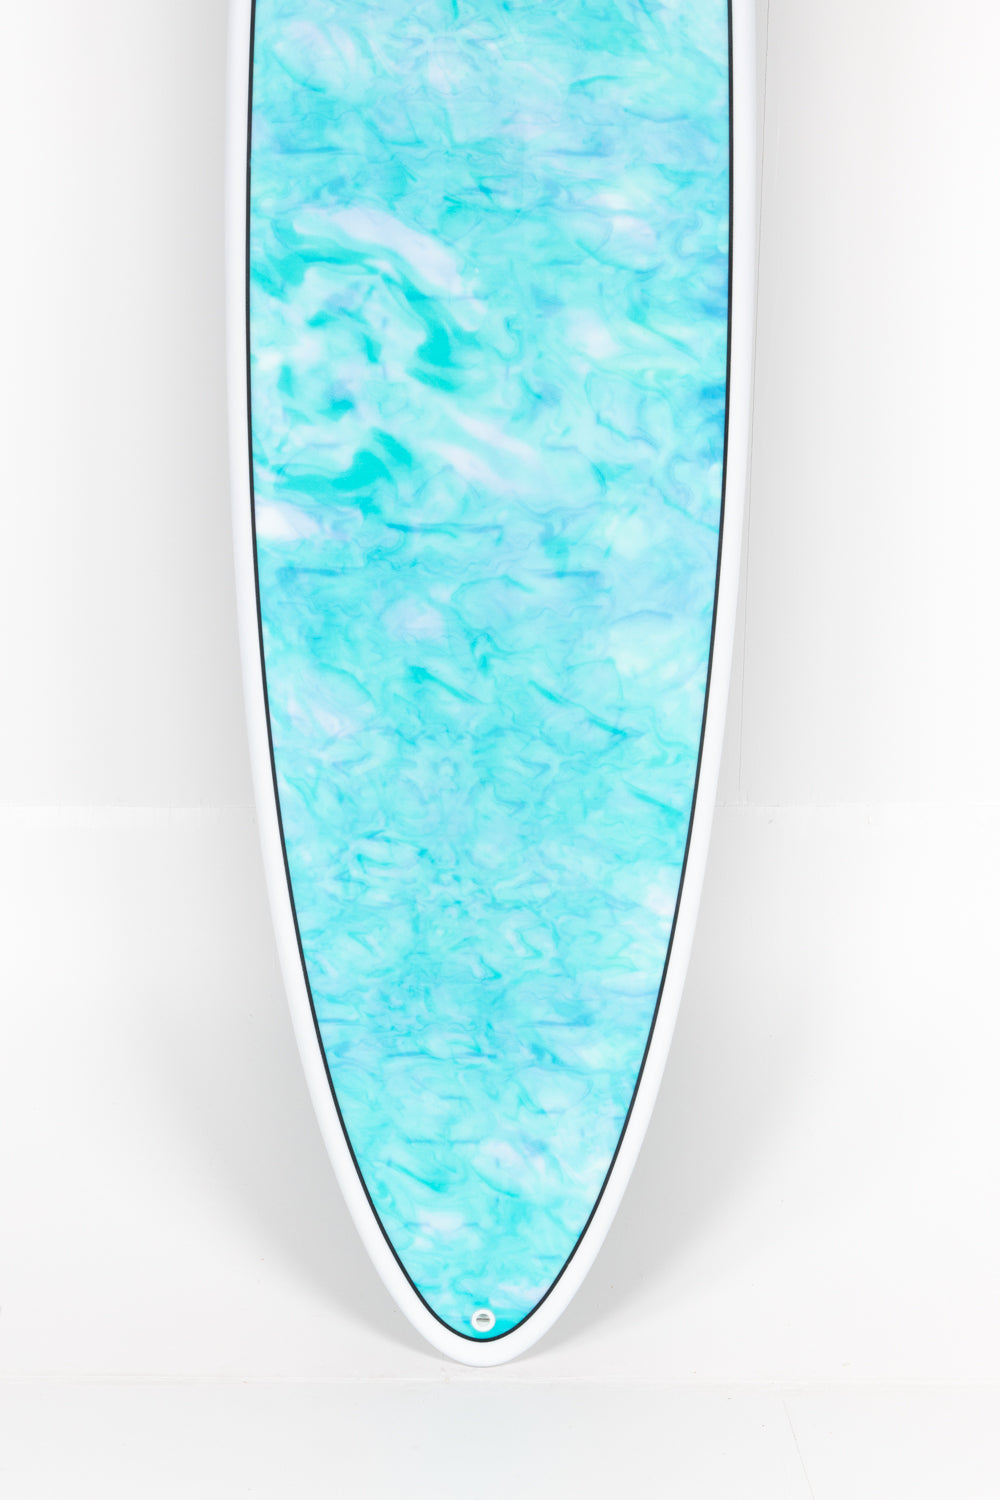 Indio Surfboards - THE EGG Swirl Effect Blue Mint - 7´2 x 21 3/4 x 